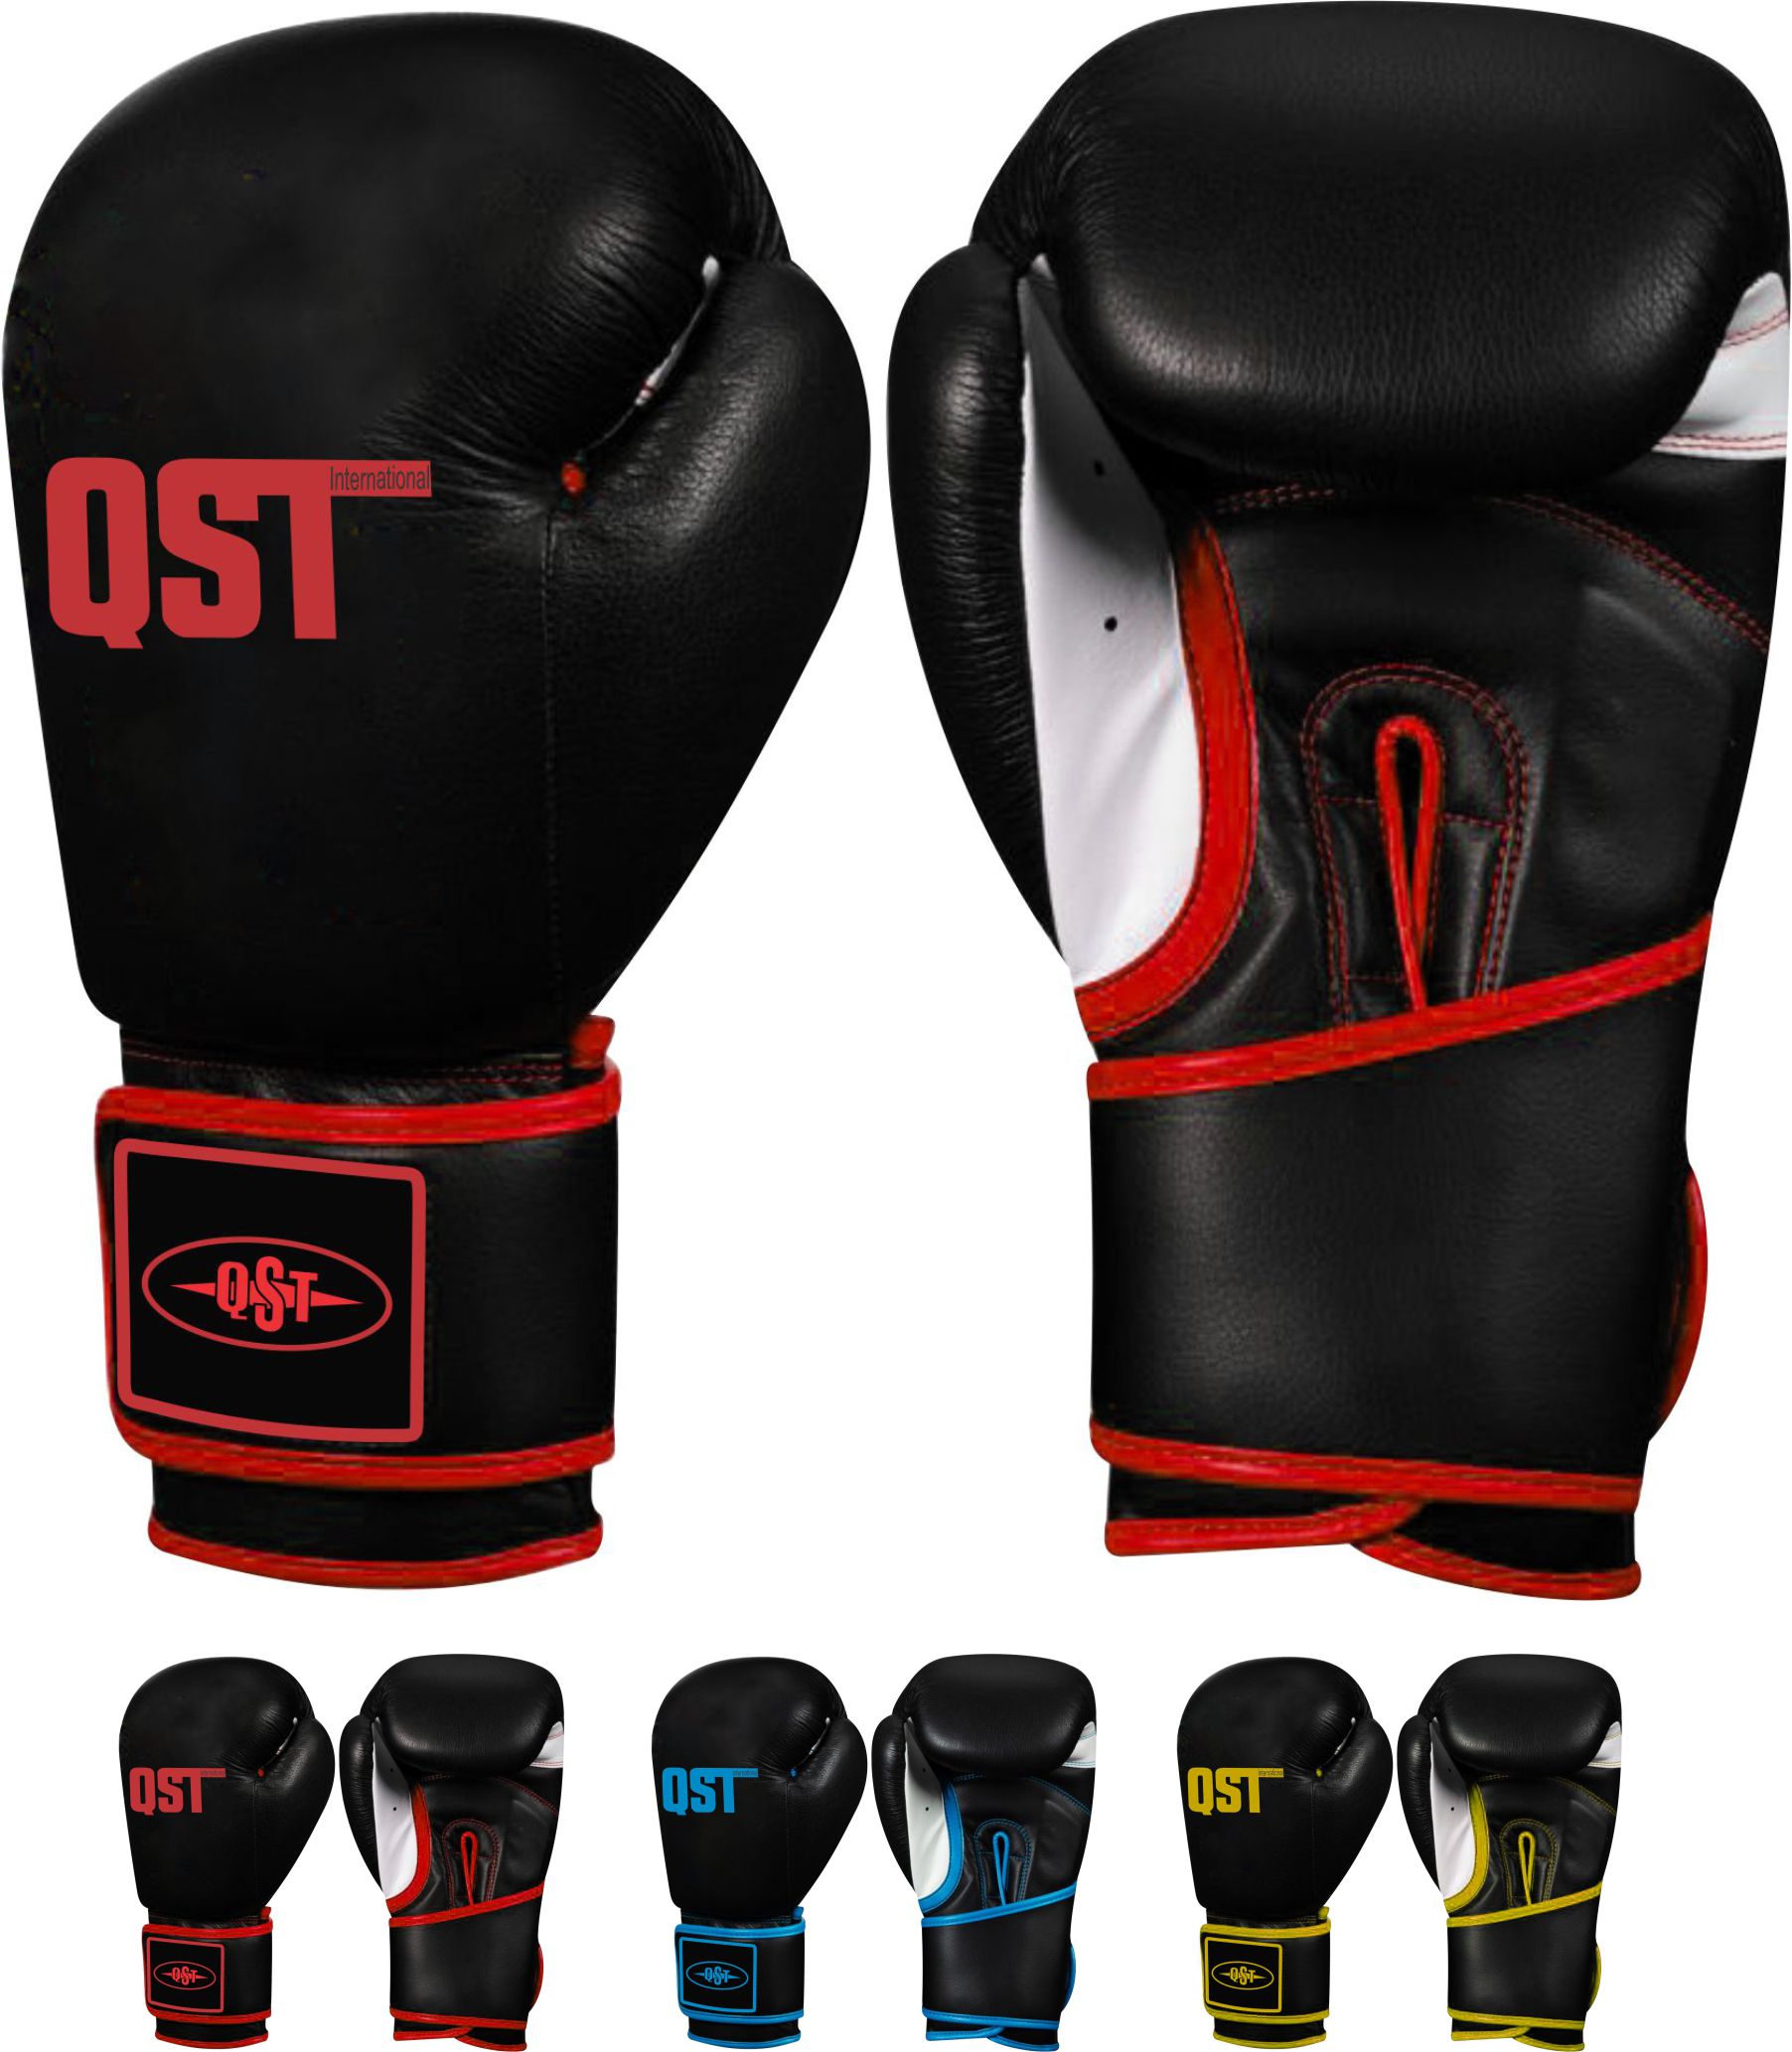 Professional Boxing Gloves - PRG-1502